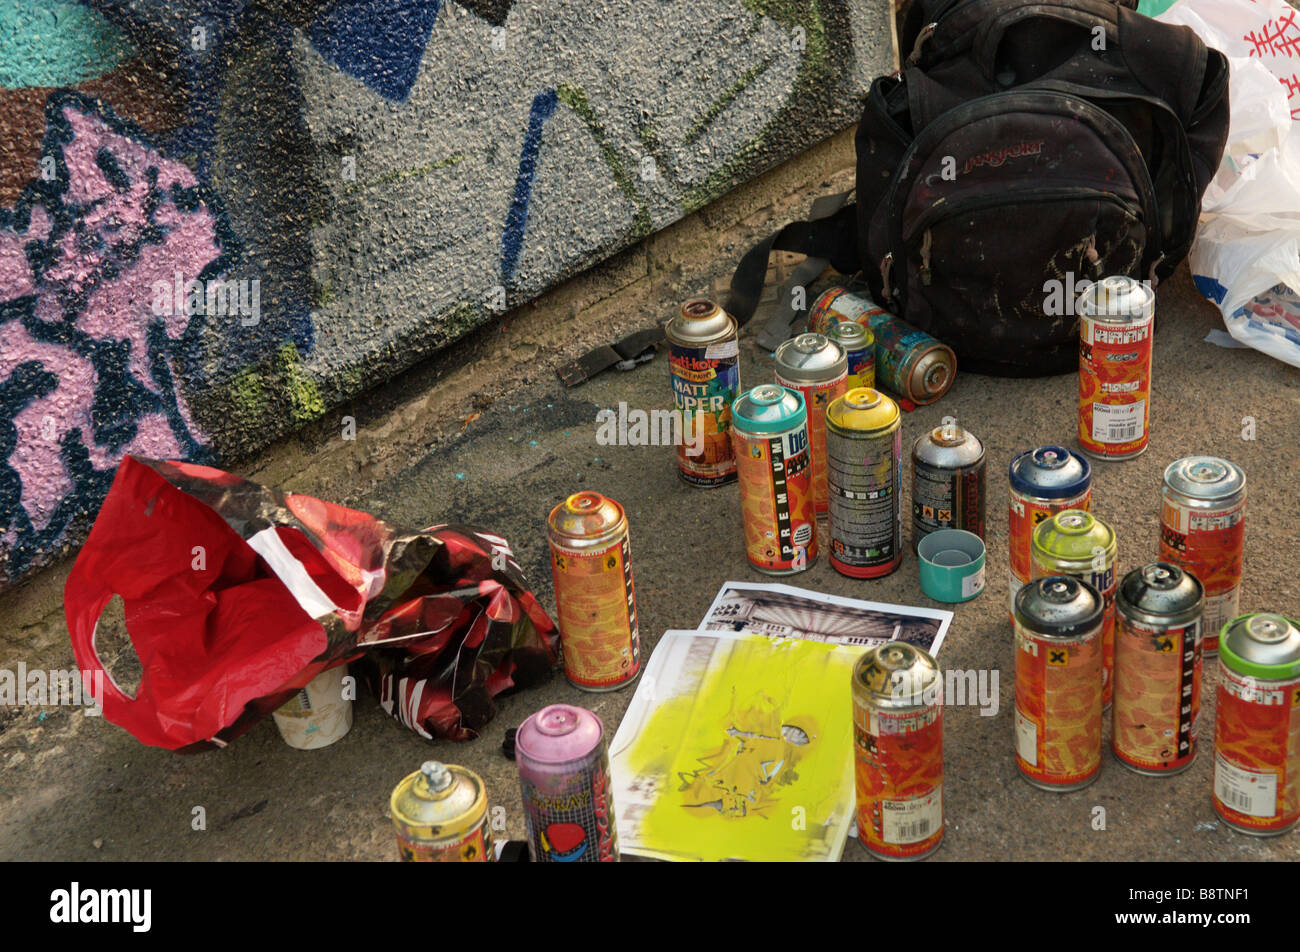 Spray paint cans used in painting graffiti and wall murals Stock Photo